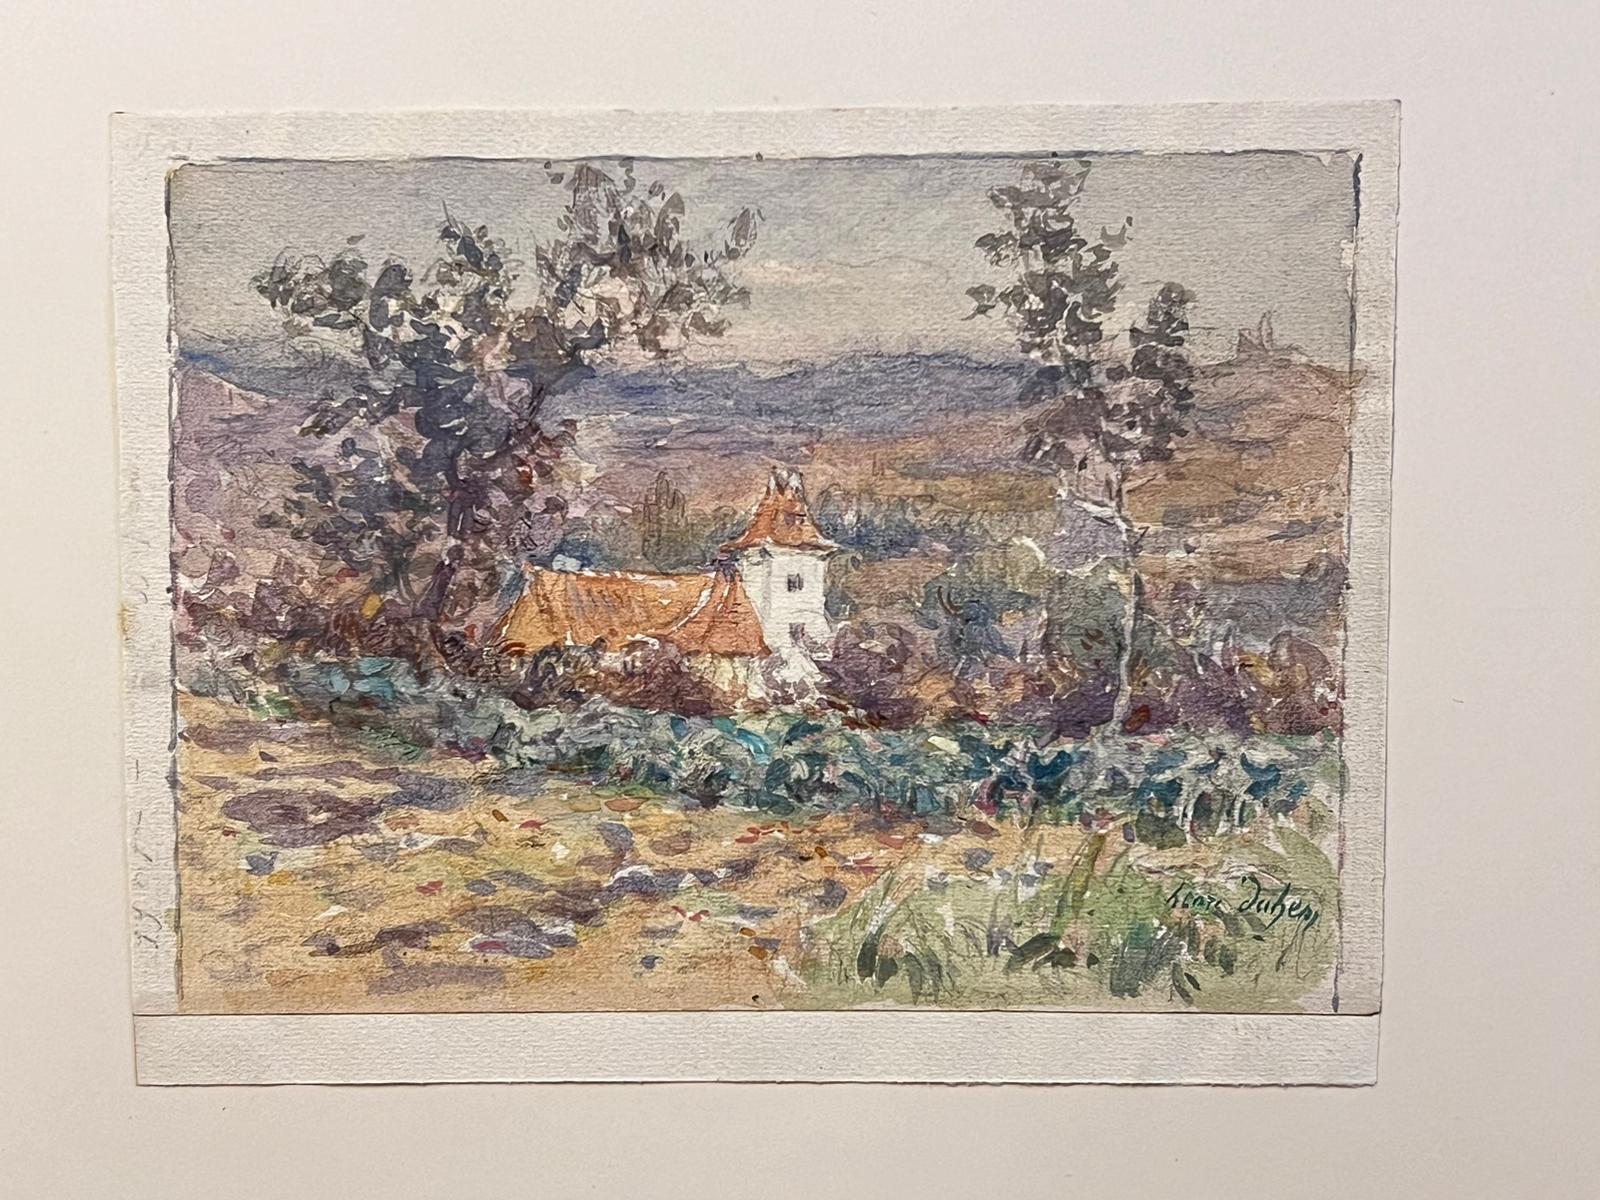 The artist: 
Henri Aime Duhem (1860-1941) French *see notes below, signed 

Title: The French Landscape

Medium:  
gouache on paper, loosely laid over card, unframed

card: 9.75 x 12.75 inches
painting: 5 x 6.5 inches

Provenance: 
private